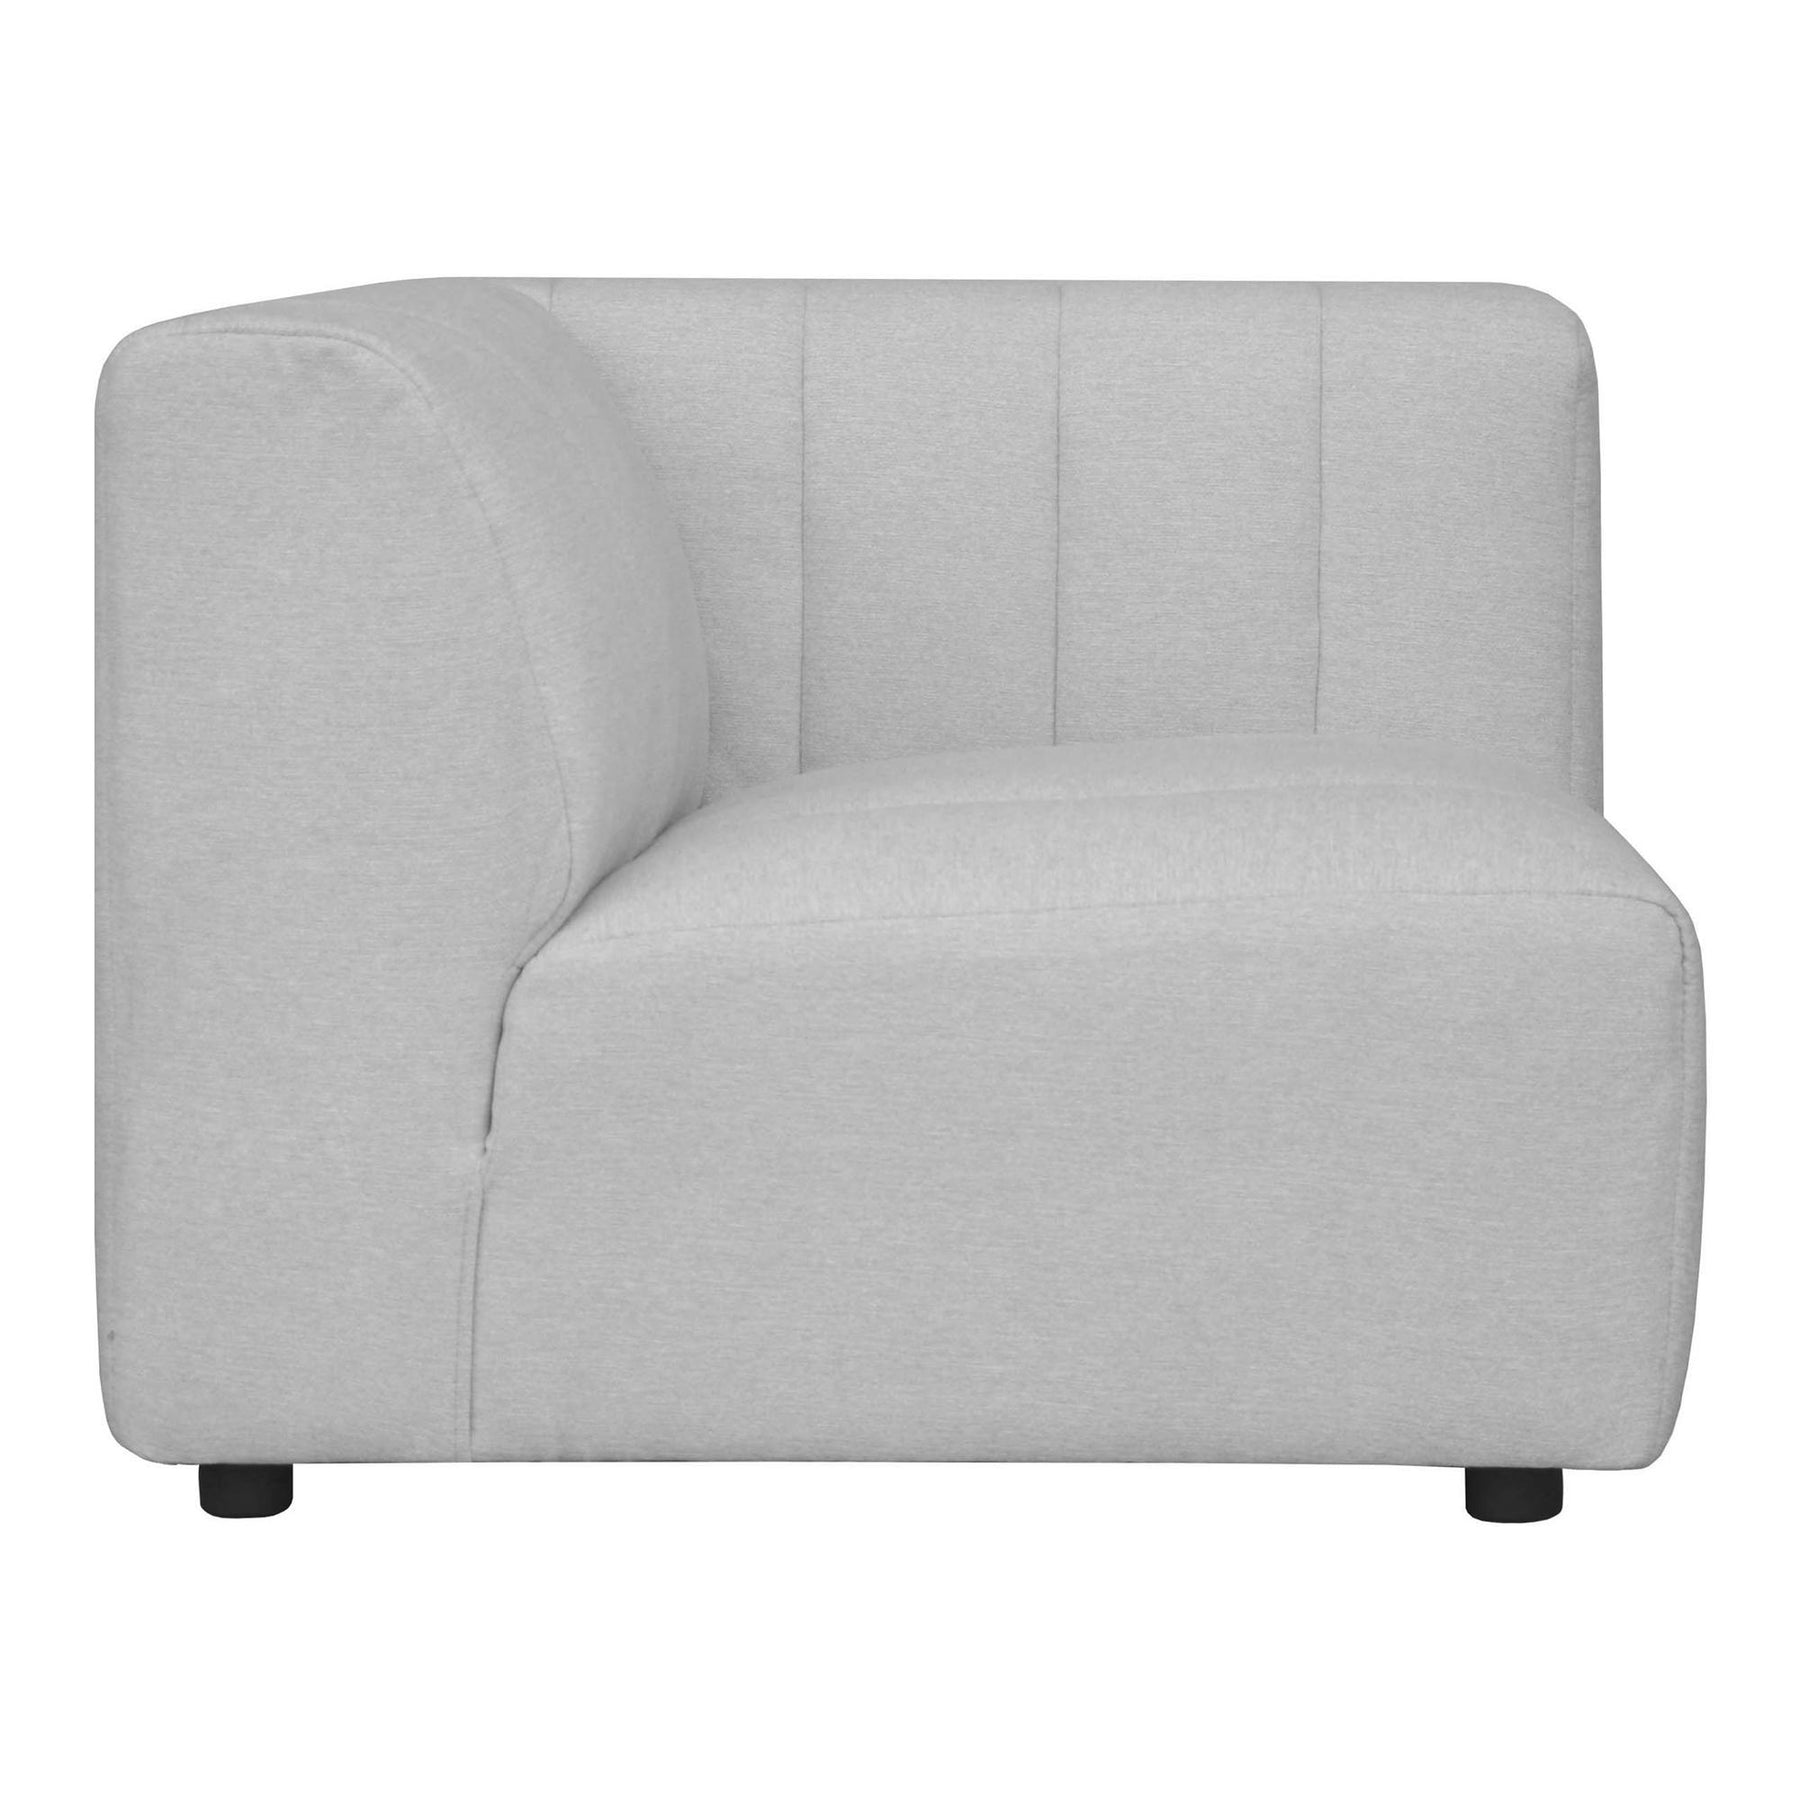 Moe's Home Collection Lyric Arm Chair Right Oatmeal - MT-1023-34